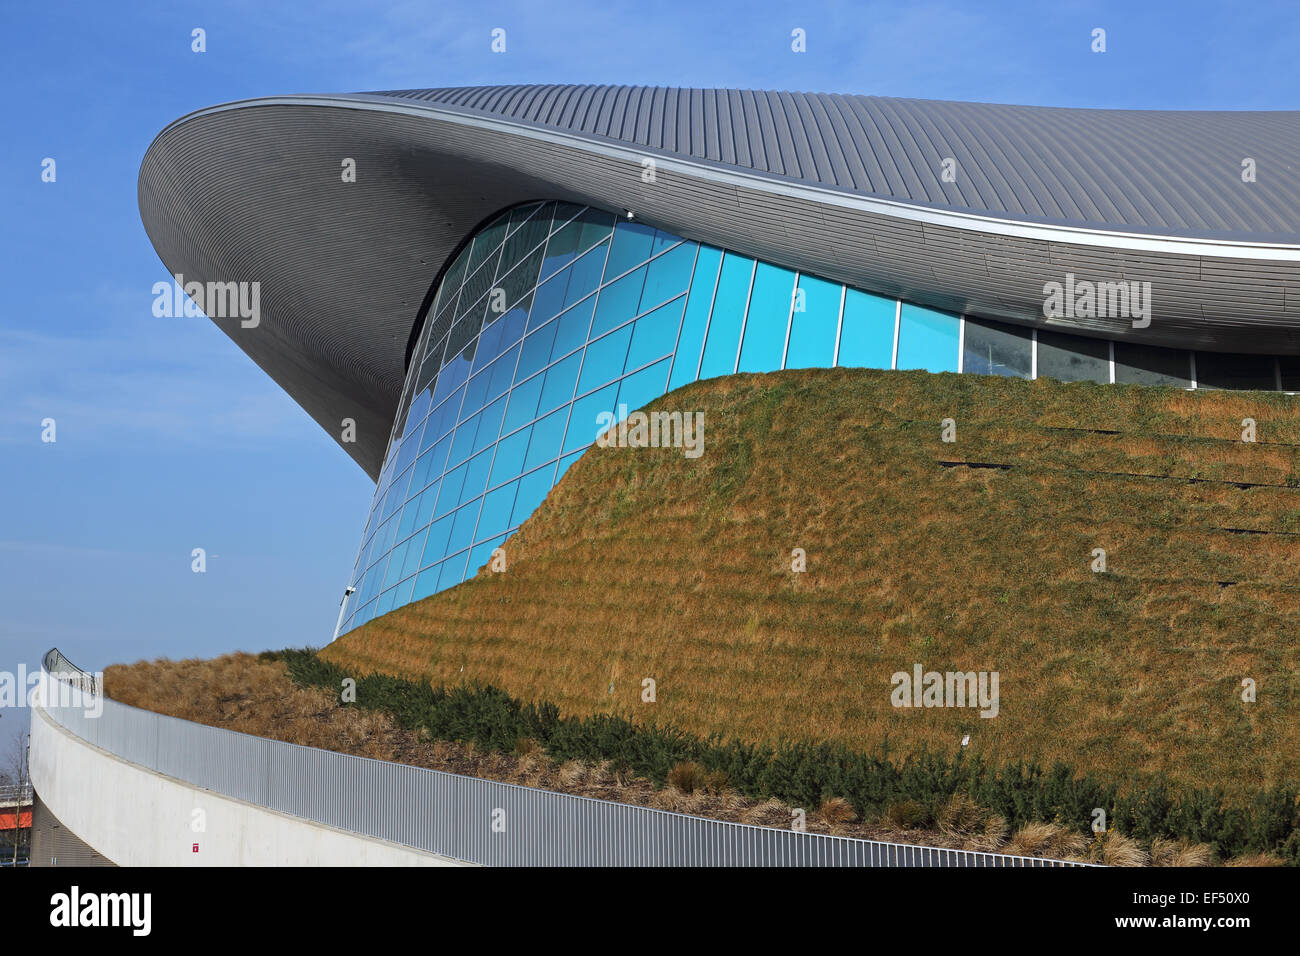 London Olympic Aquatic centre showing living grass roof, concrete roof structure and glazing. Temporary seating wings removed. Stock Photo